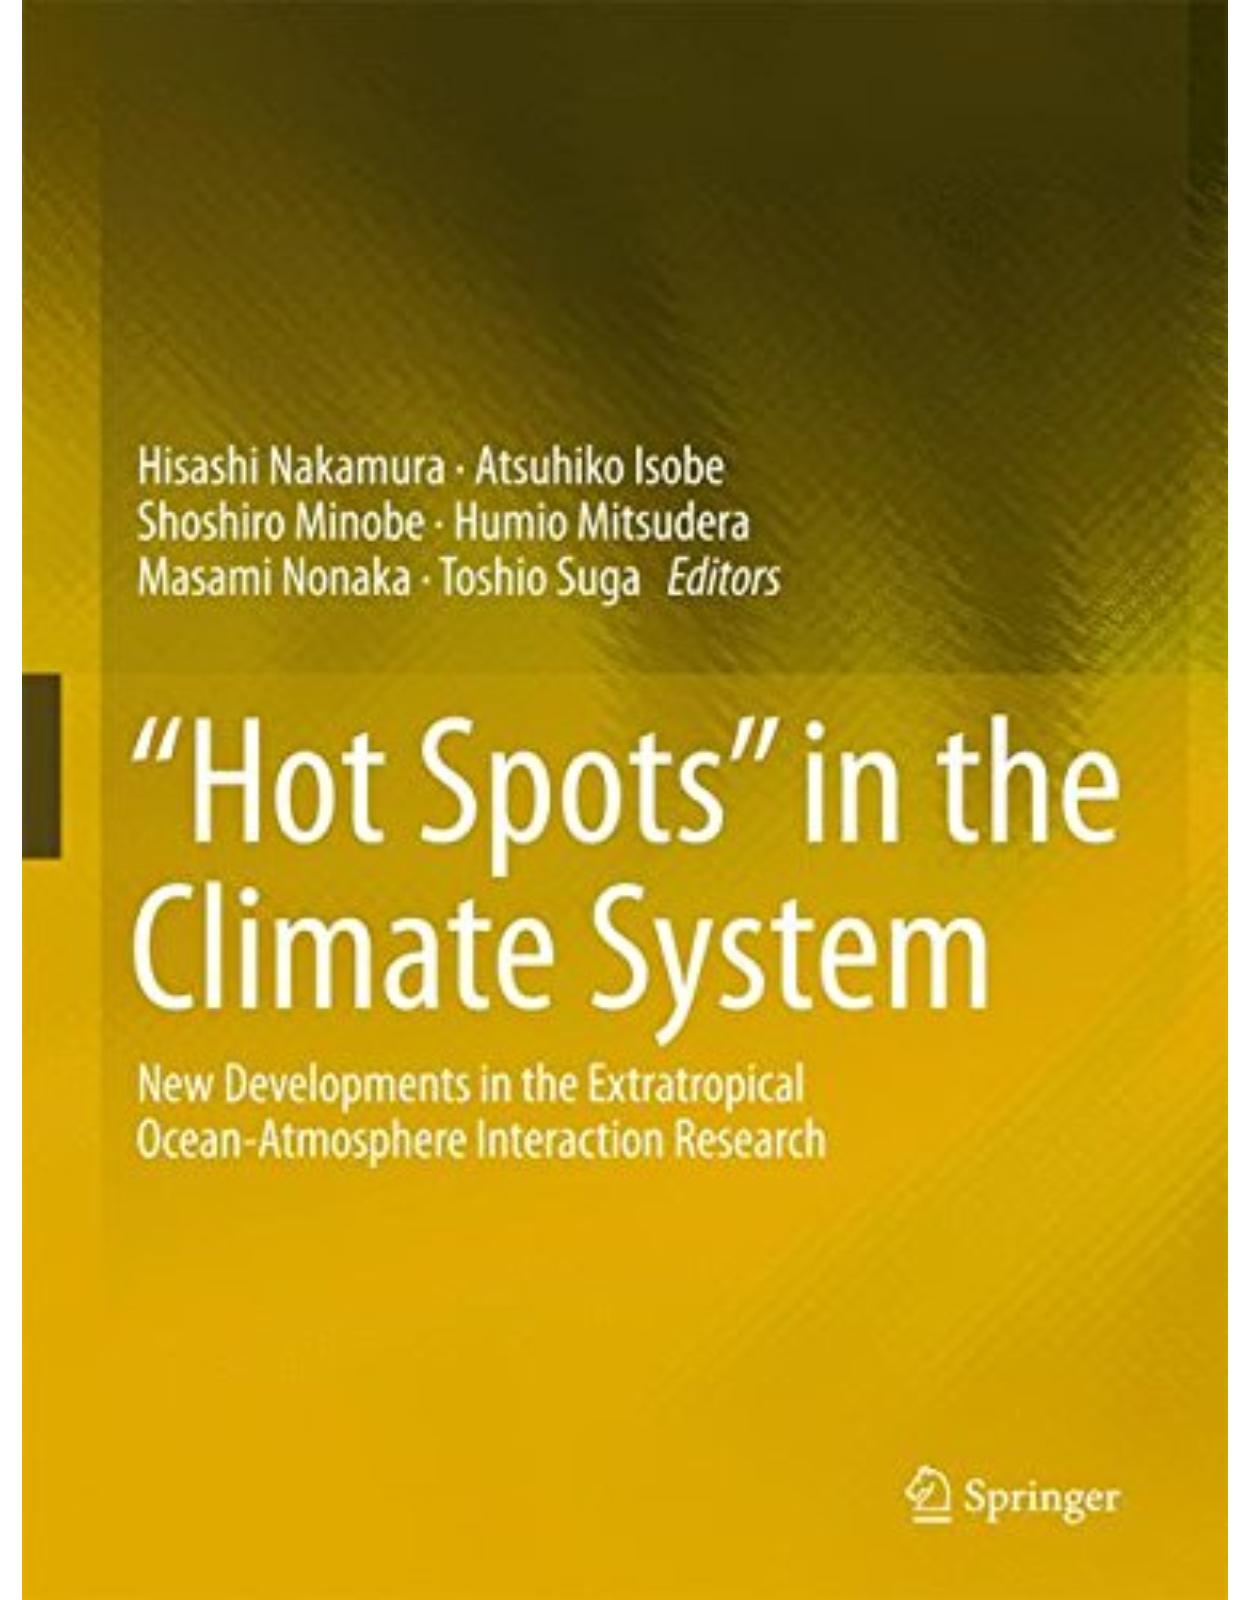 “Hot Spots” in the Climate System: New Developments in the Extratropical Ocean-Atmosphere Interaction Research